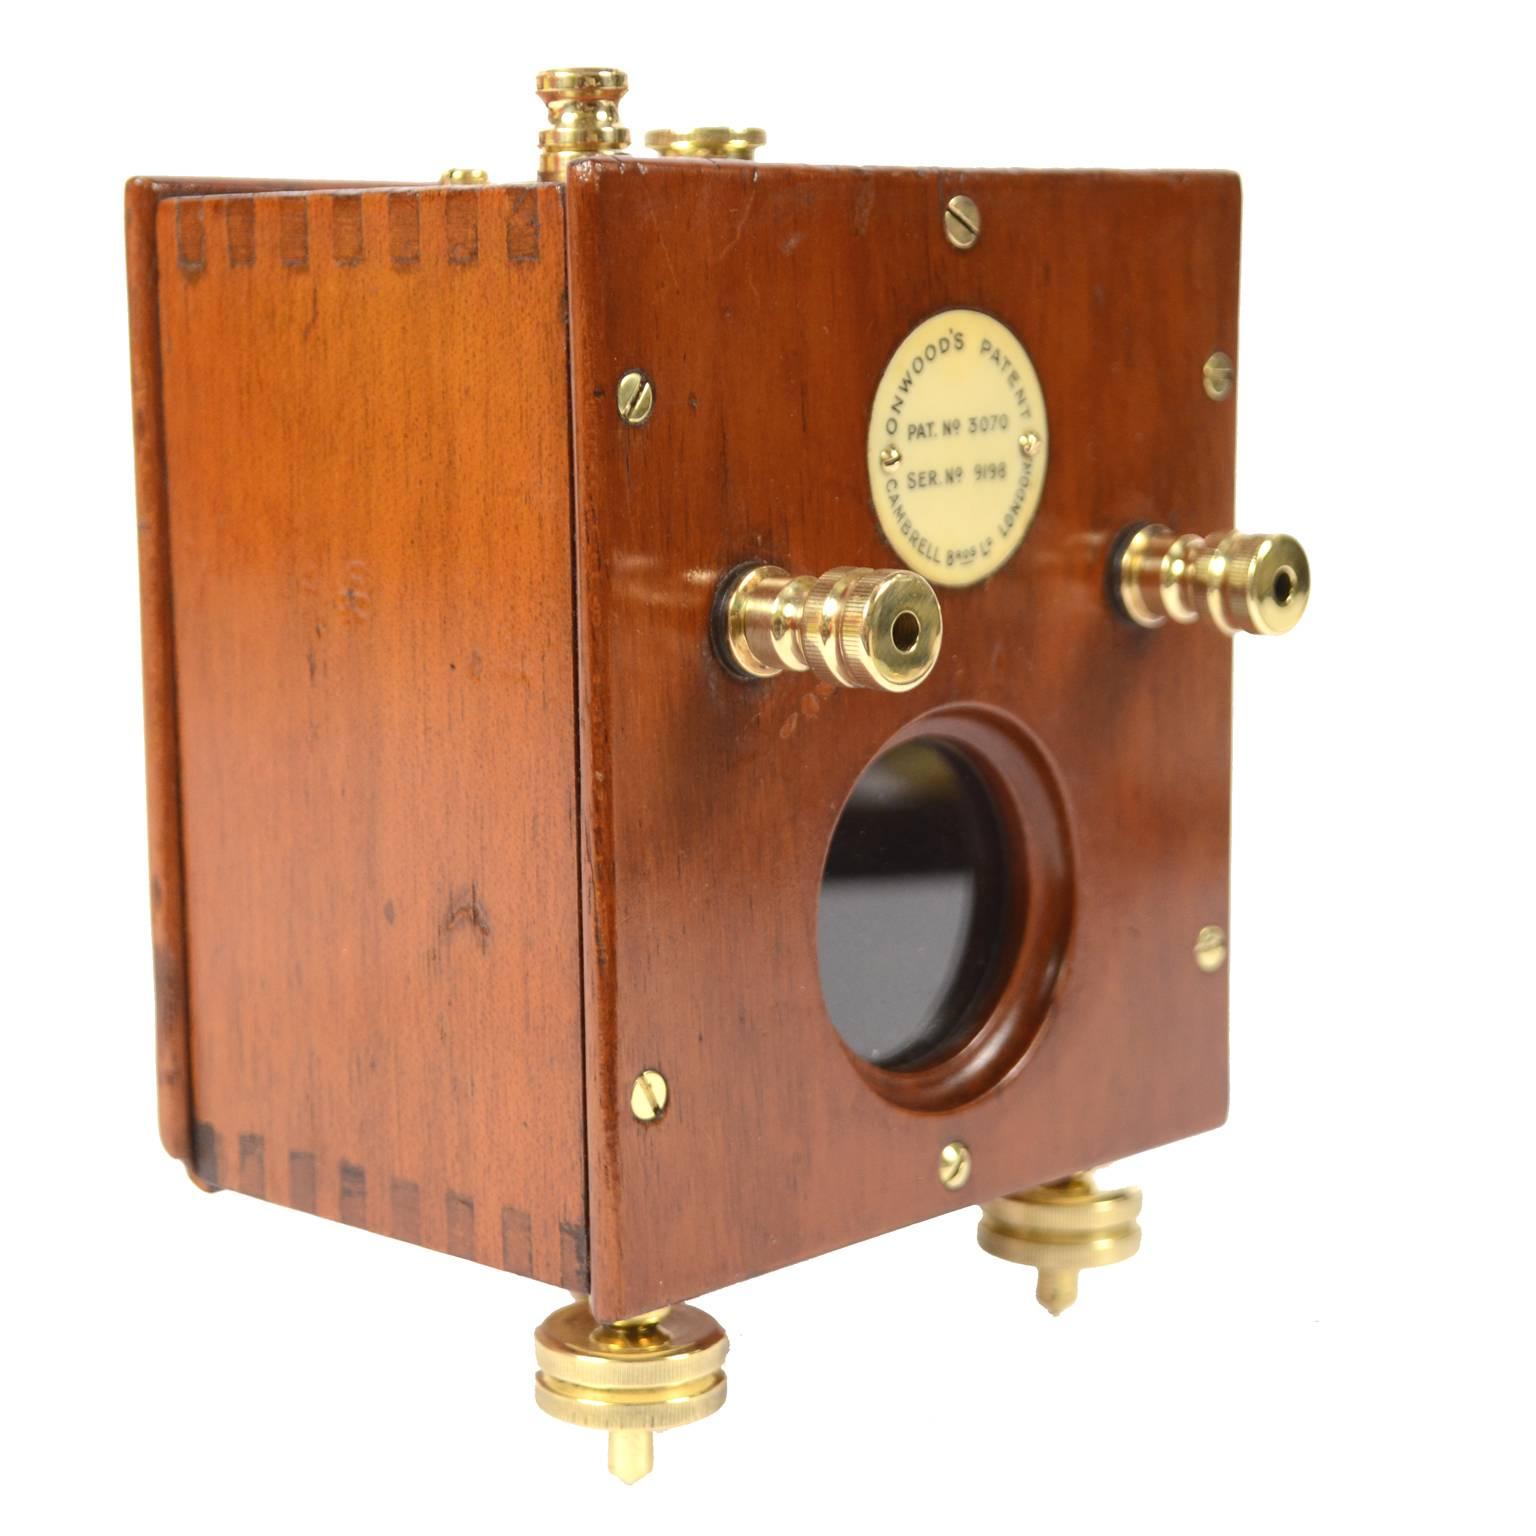 Mirror galvanometer made of wooden oak signed Cambrell Bross London Pat. N. Ser 3070 n. 9198, half of the 19th century. Instrument used primarily for measurement of insulation of telegraph cables. Measures cm: 11.5 x 17 H 10. Shipping insured by